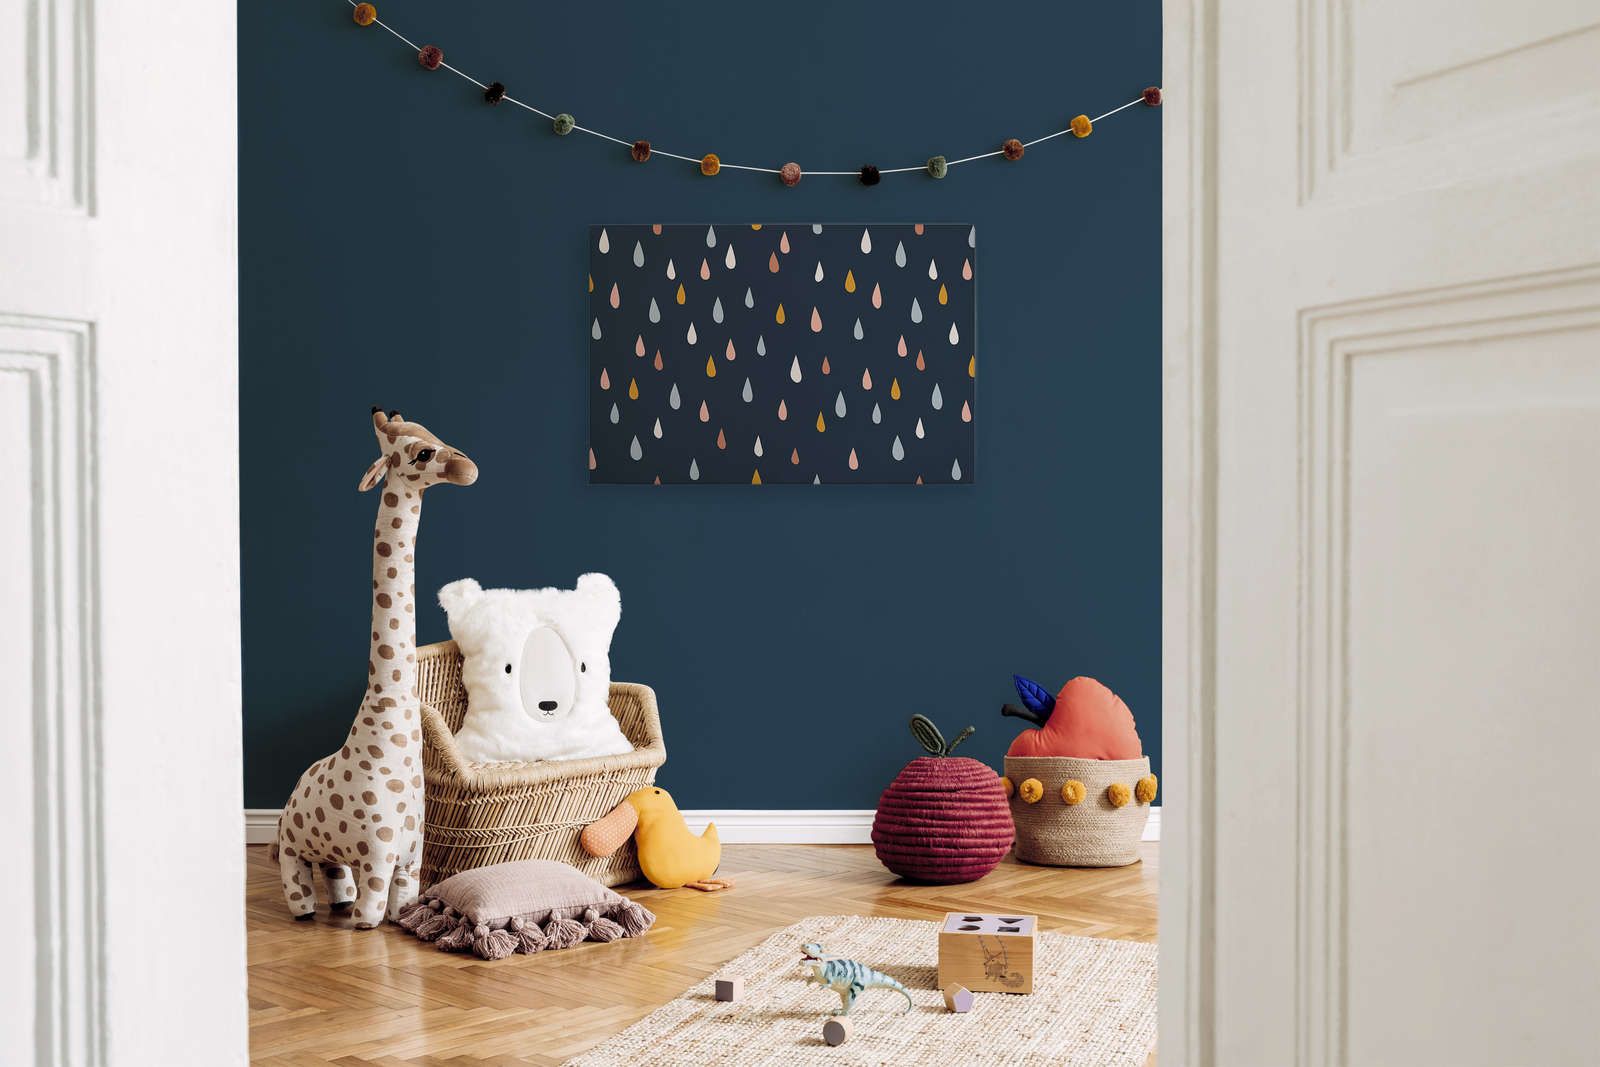             Canvas for children's room with colourful drops - 90 cm x 60 cm
        